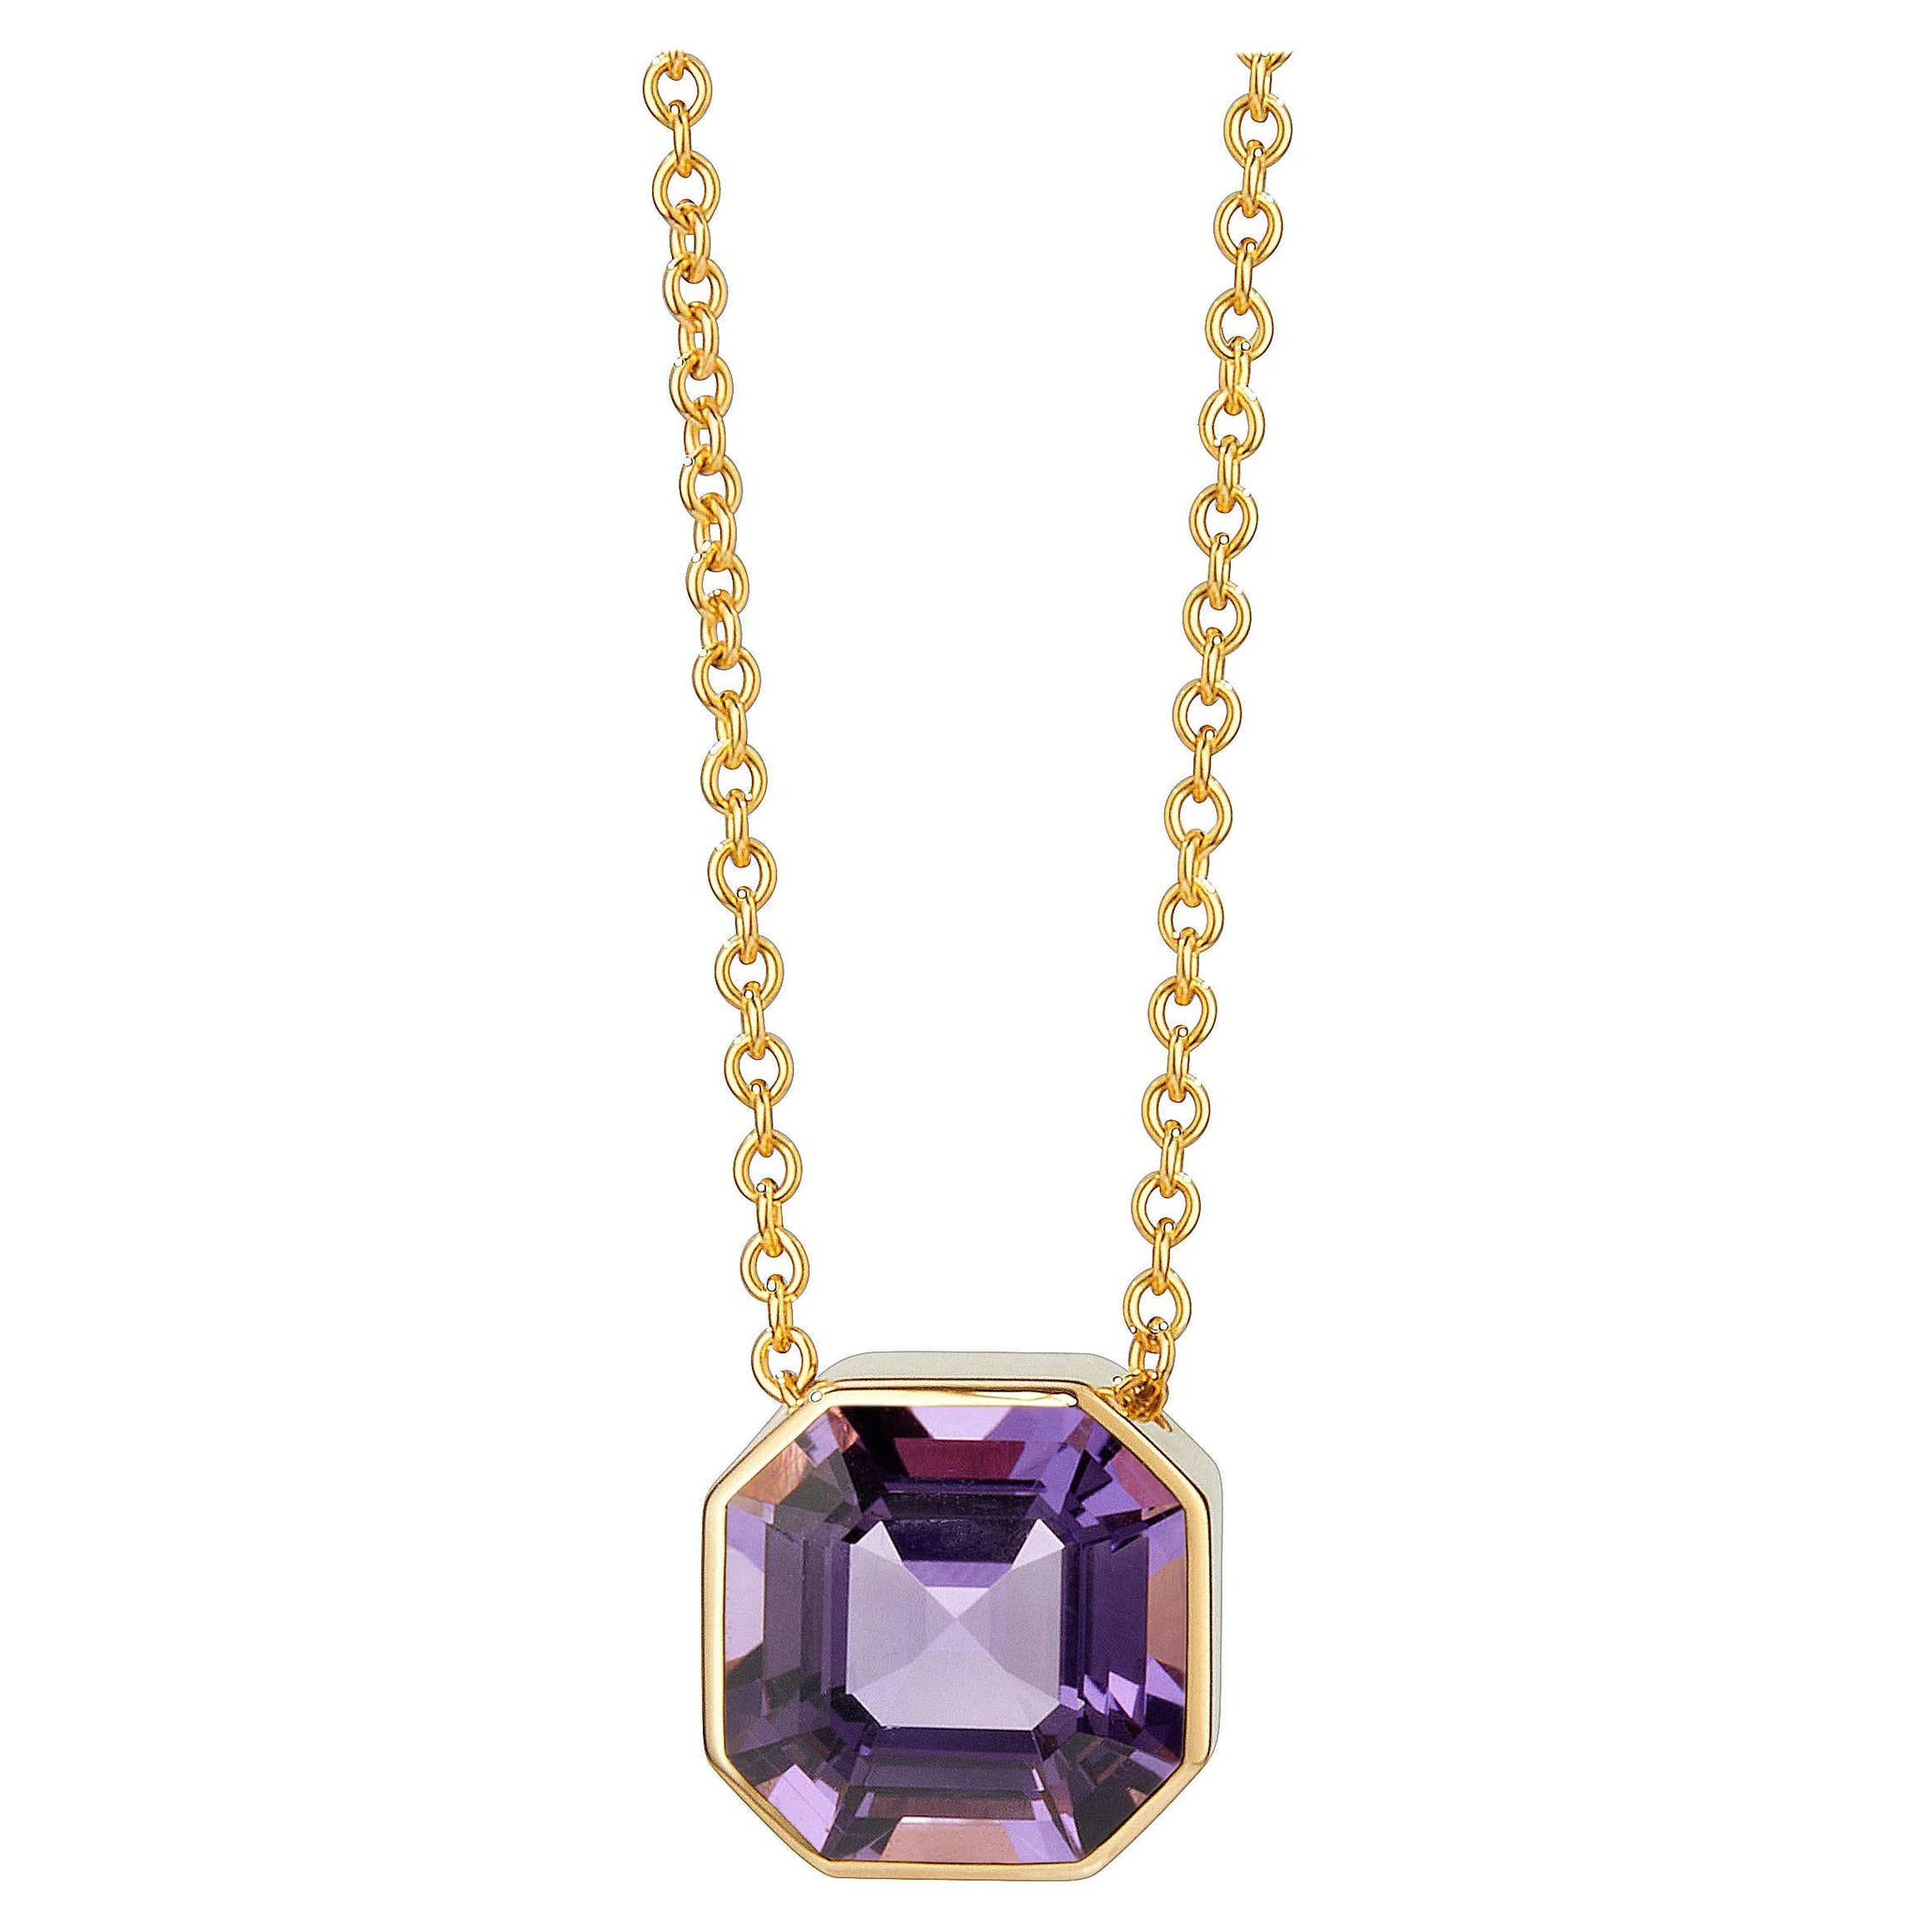 Syna Yellow Gold Amethyst Necklace